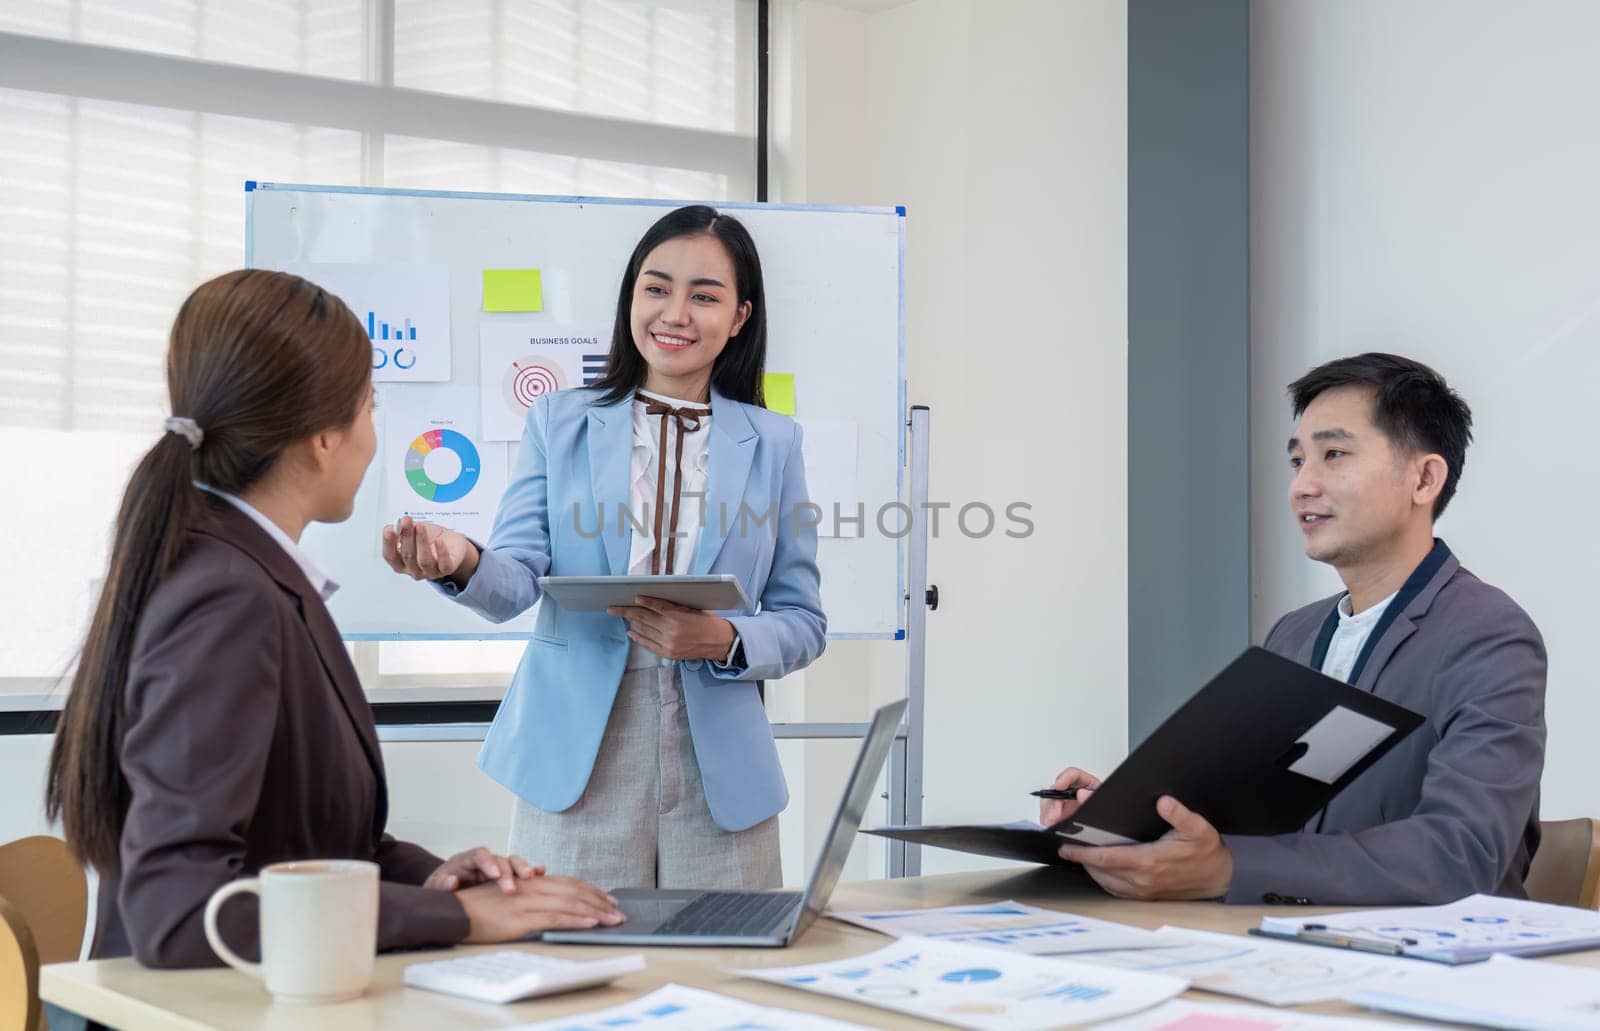 Business People Meeting using laptop computer,calculator,notebook,stock market chart paper for analysis Plans to improve quality next month. Conference Discussion Corporate Concept. by wichayada